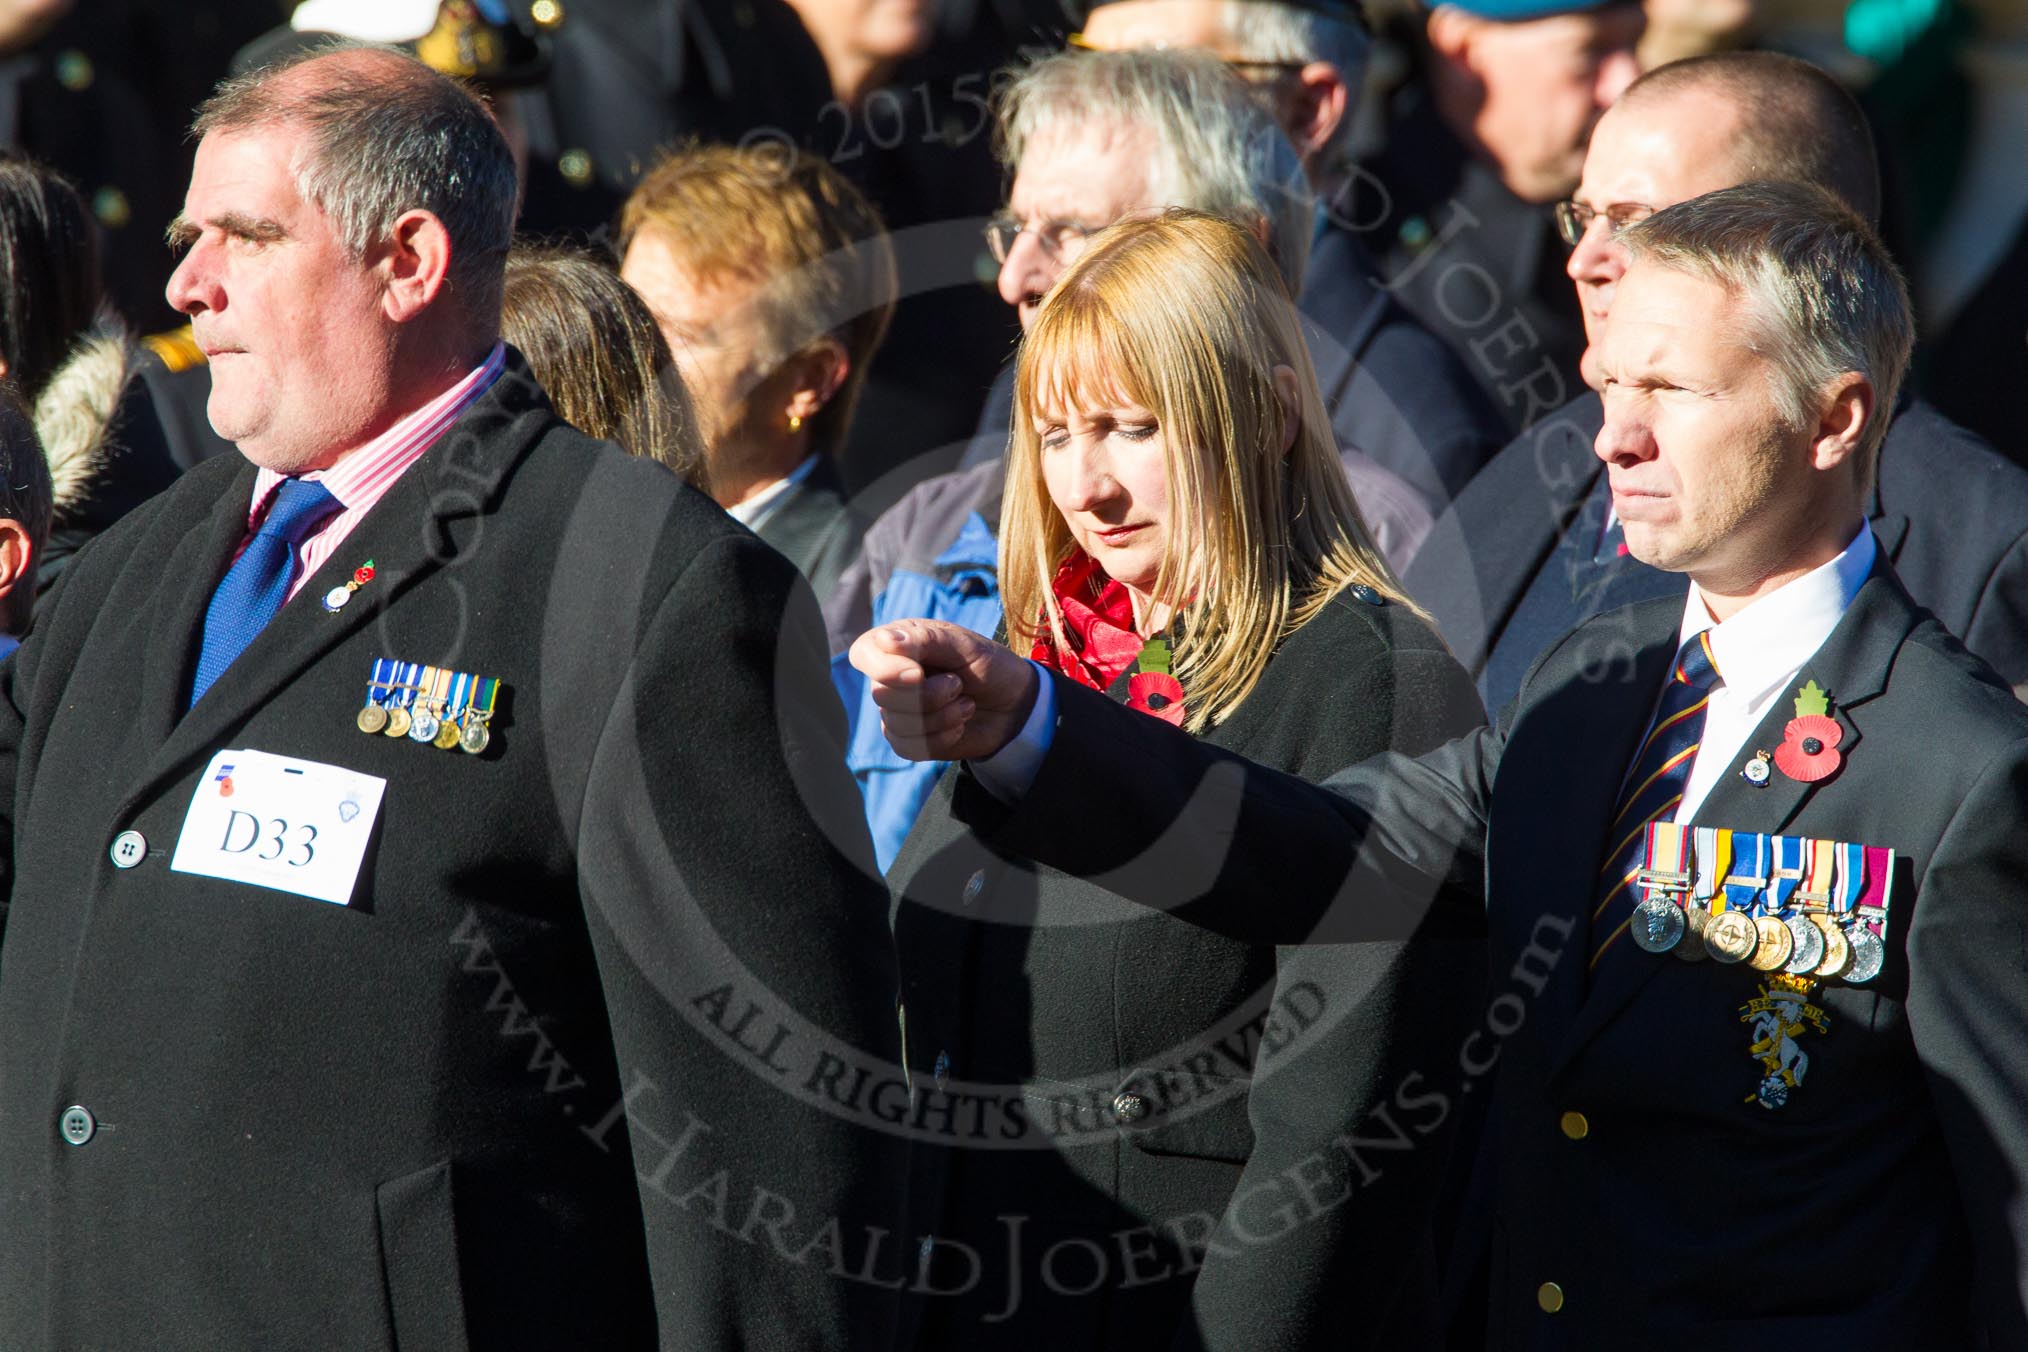 Remembrance Sunday Cenotaph March Past 2013: D33 - Combat Stress..
Press stand opposite the Foreign Office building, Whitehall, London SW1,
London,
Greater London,
United Kingdom,
on 10 November 2013 at 11:43, image #307